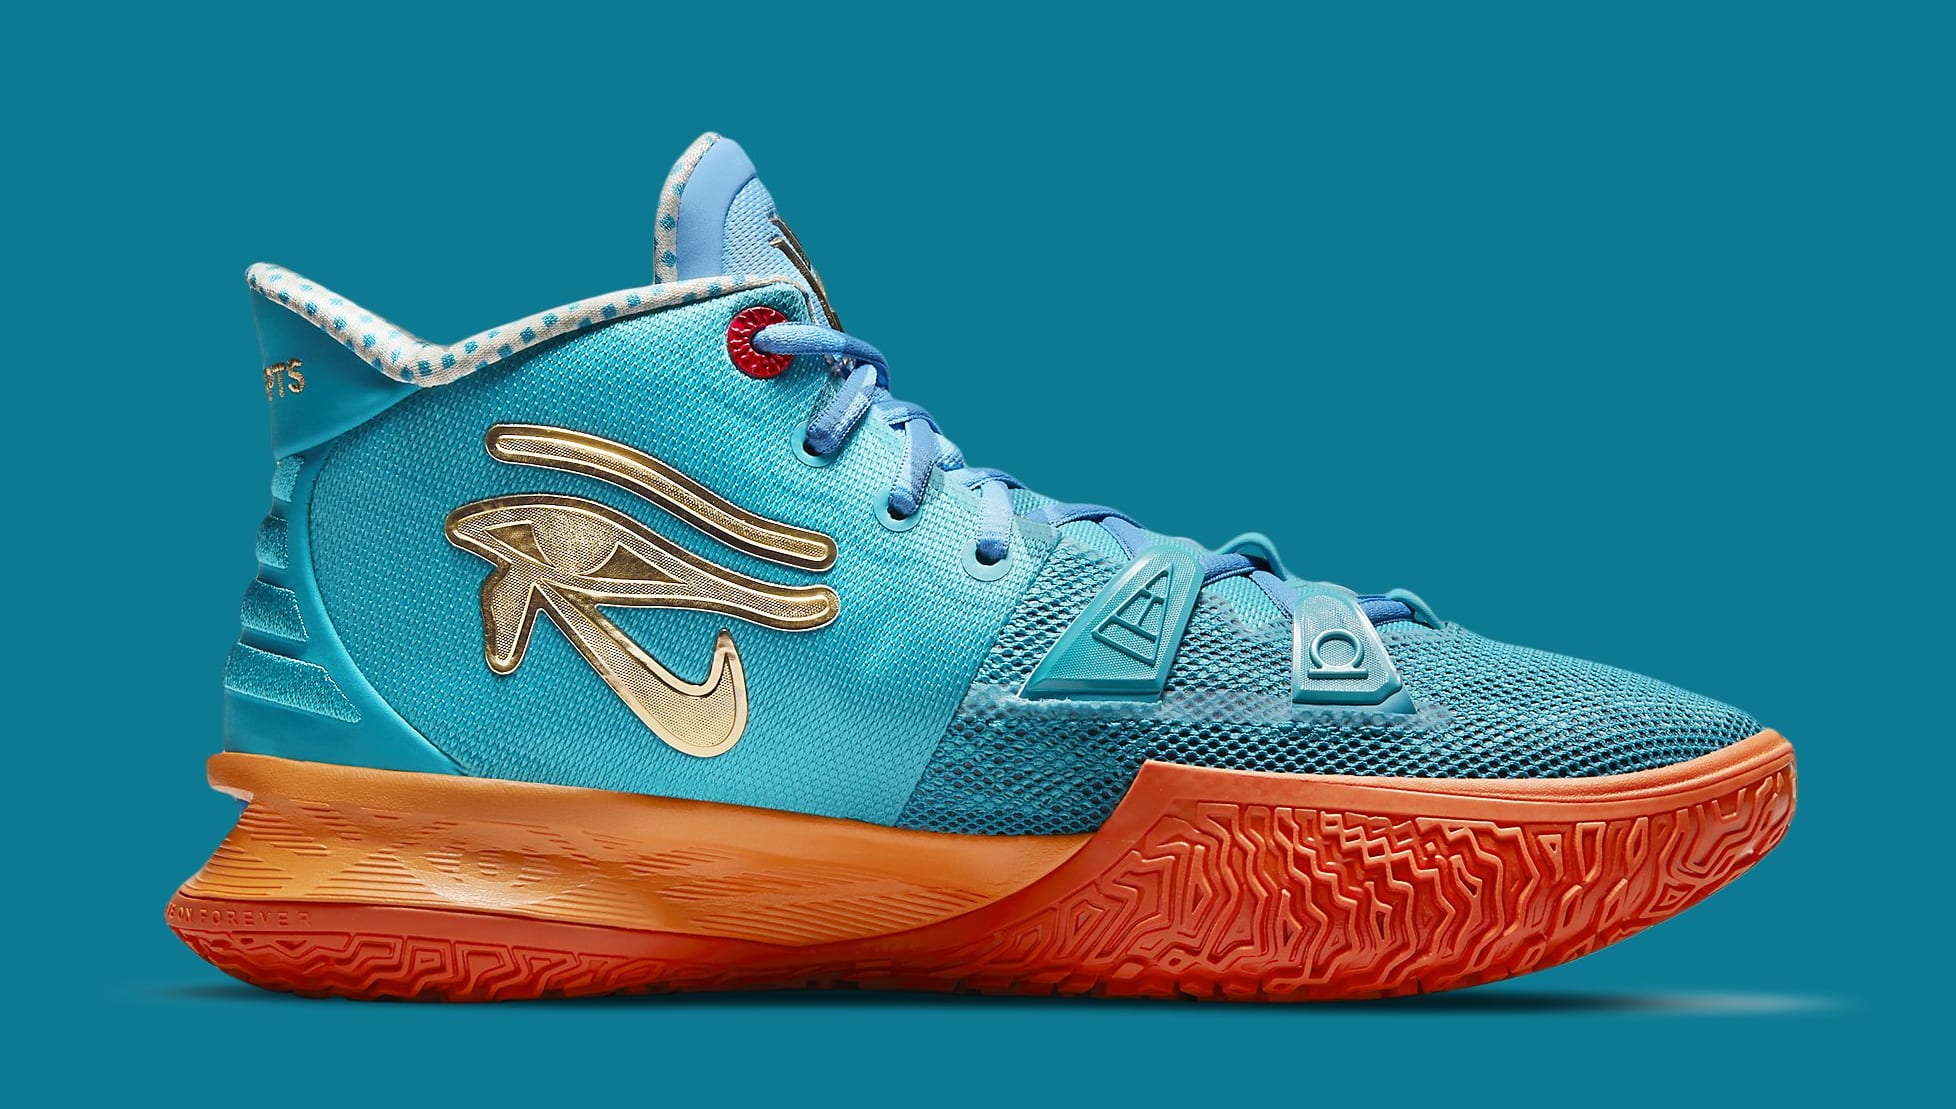 Concepts x Nike Kyrie 7 CT1137-900 Medial